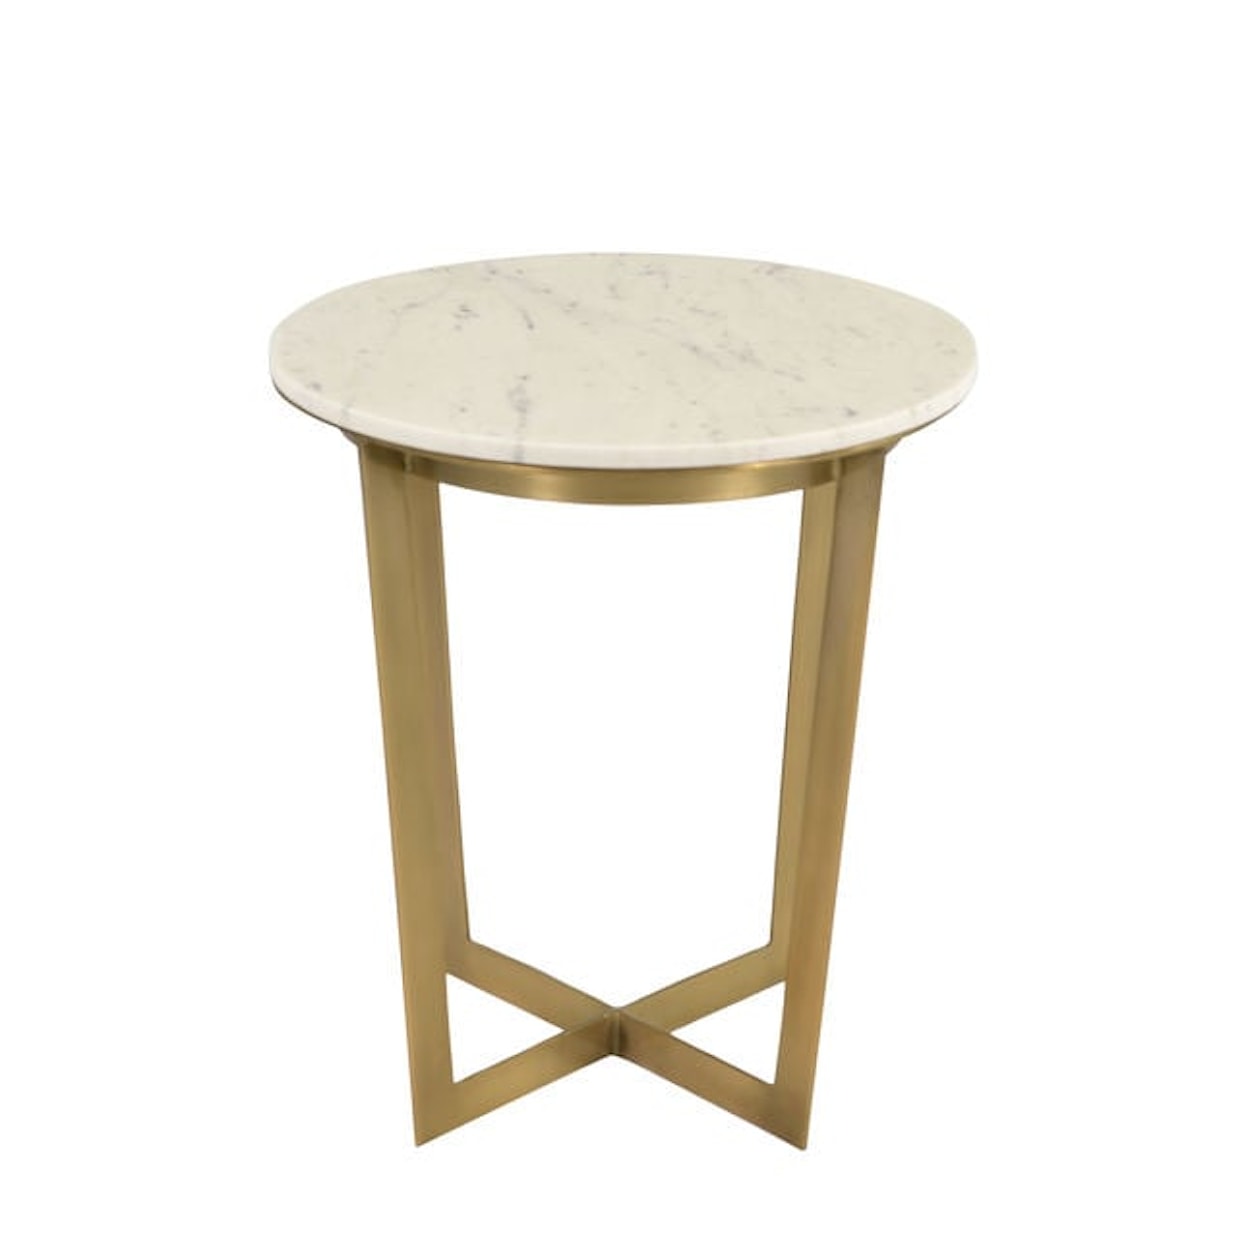 Dovetail Furniture Clinton Clinton Side Table